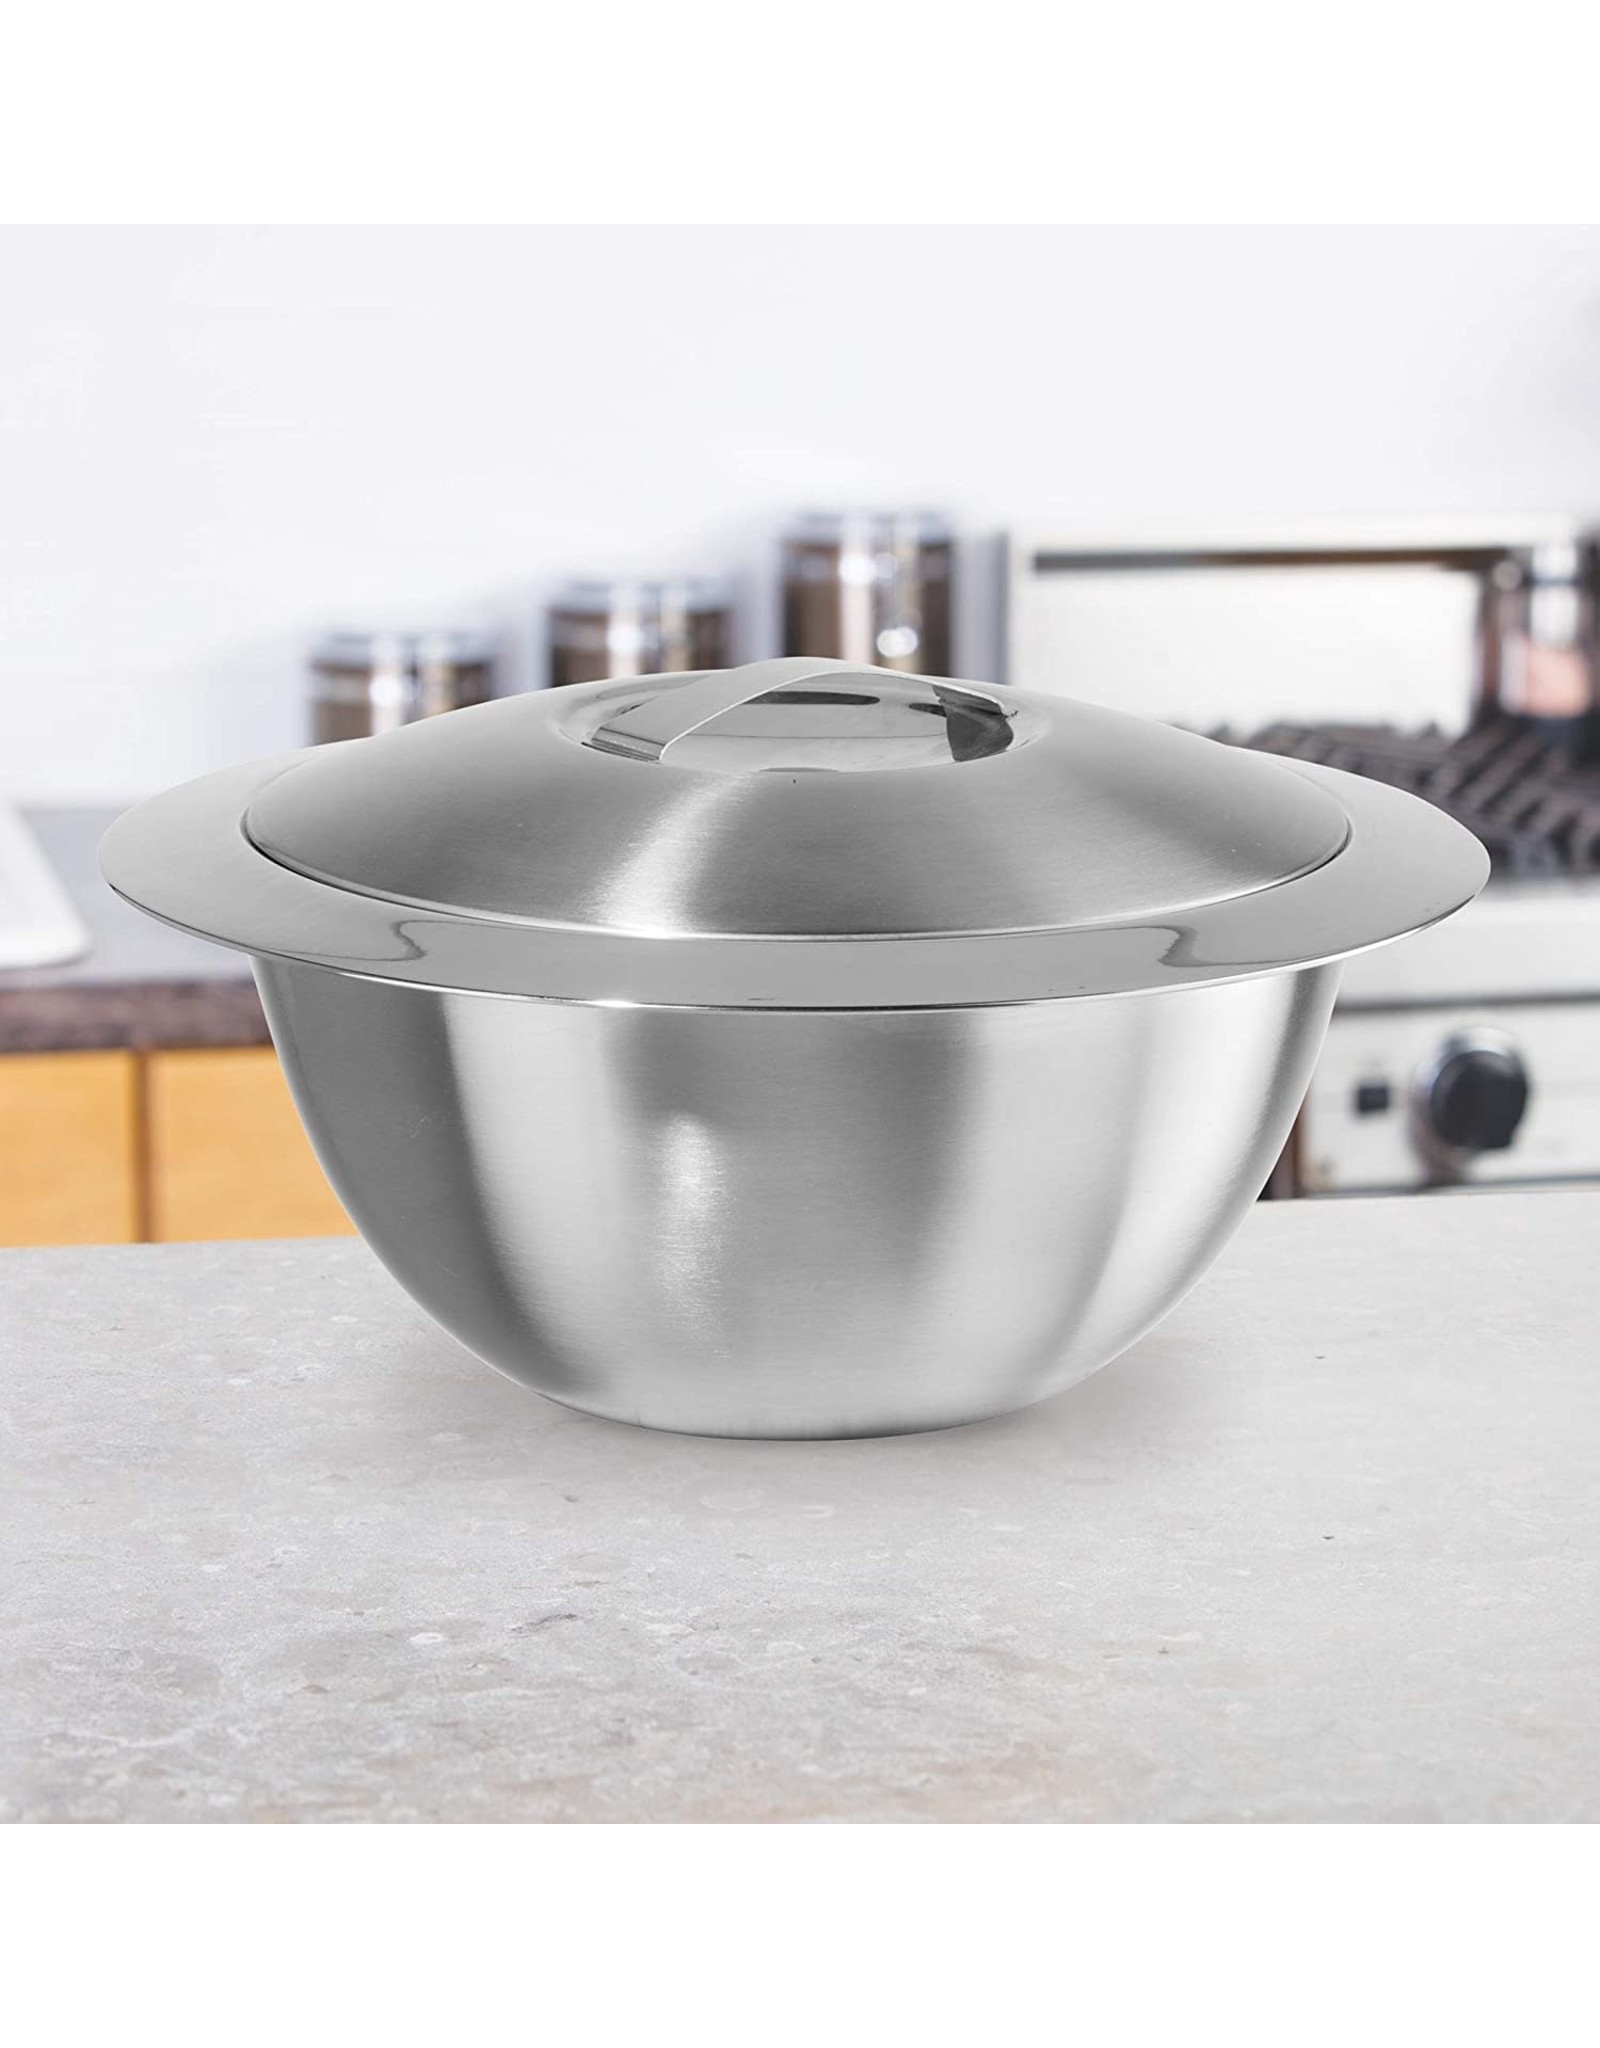 Double Wall Insulated Hot/Cold Serving Bowl with Lid - 3 qt -  Blanton-Caldwell